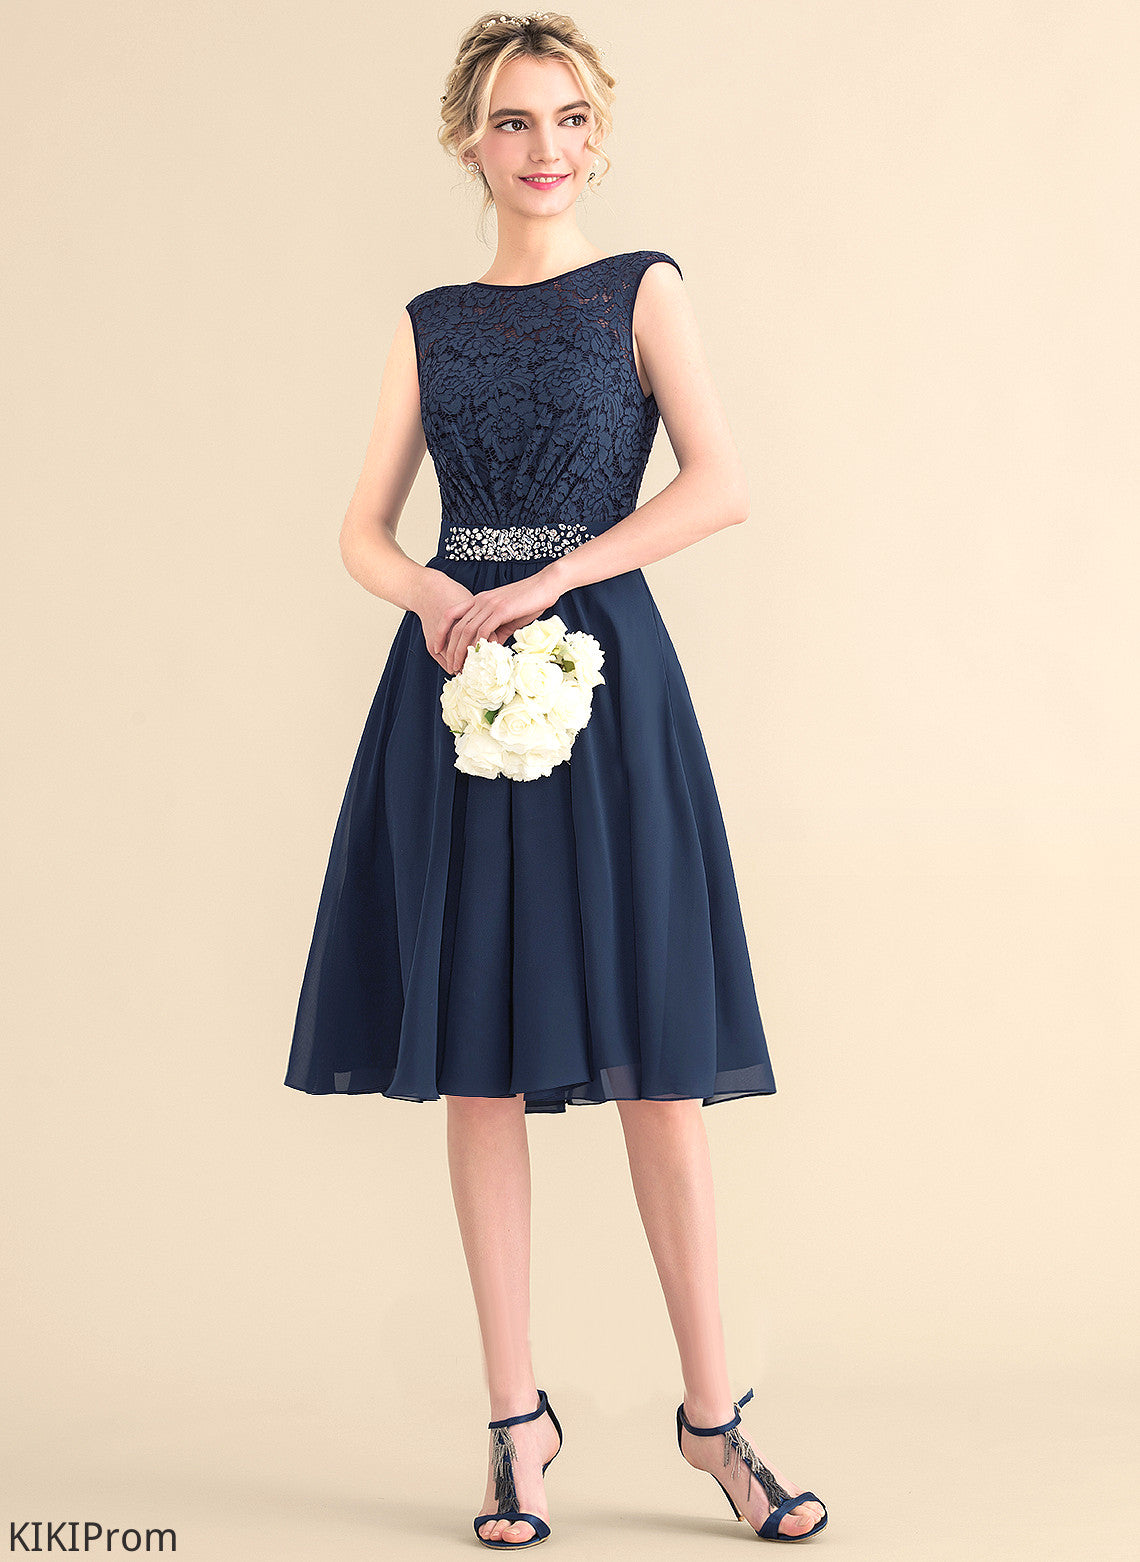 Bow(s) Lace Homecoming With Neck Lace Beading Chiffon Knee-Length Dress A-Line Sylvia Scoop Homecoming Dresses